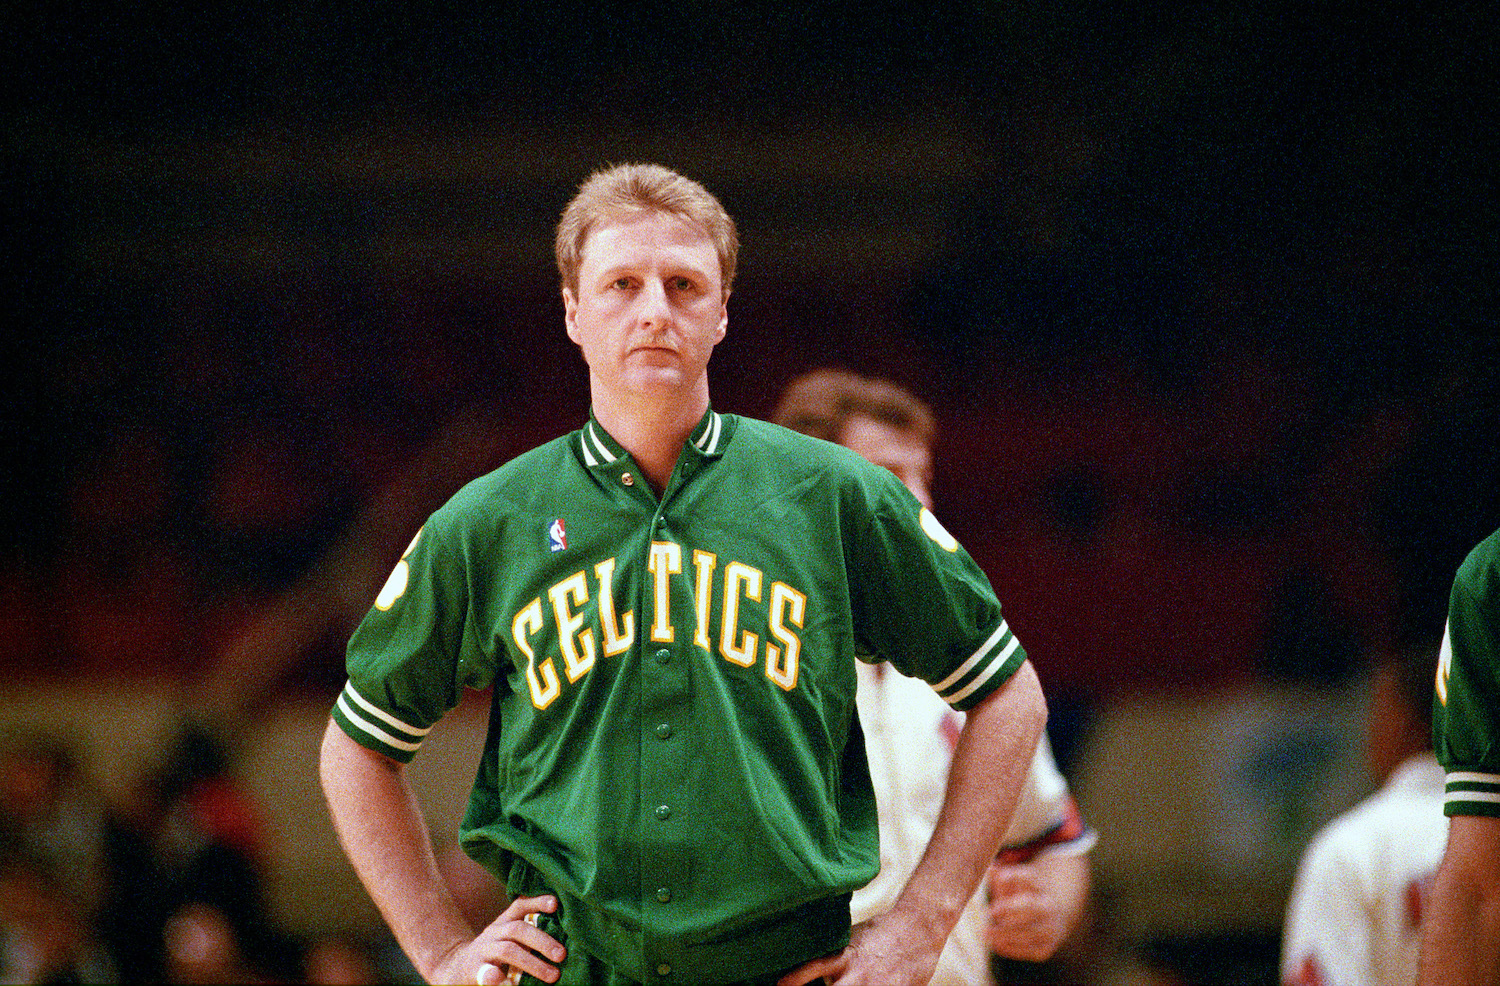 Larry Bird stands on the court in his Boston Celtics warm-up gear.